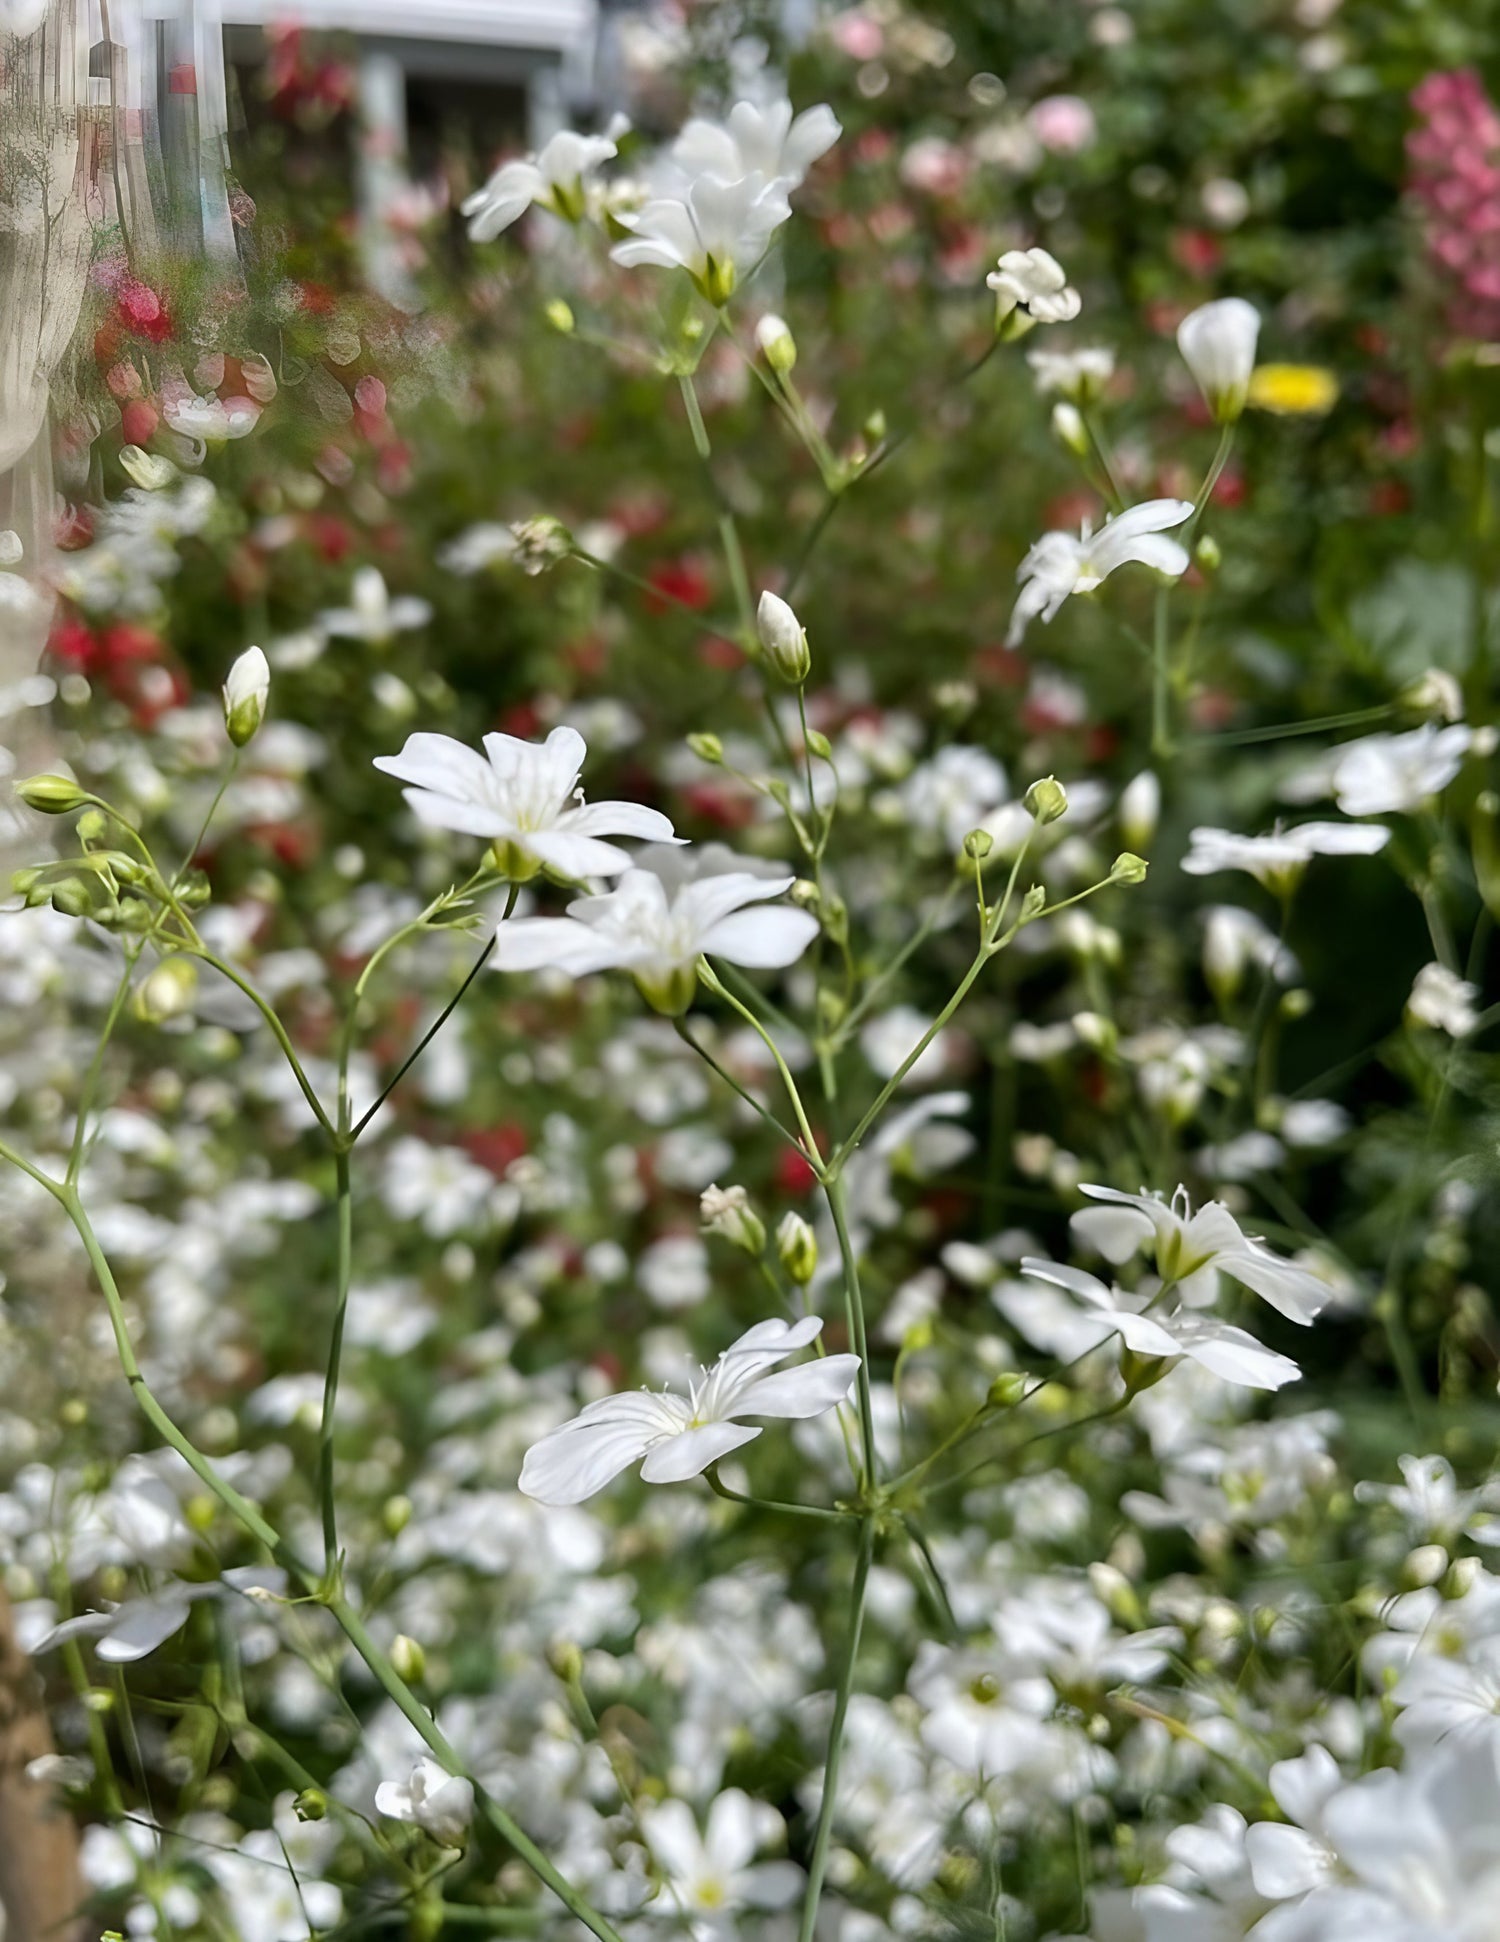 Gypsophila Elegans Covent Garden blossoming in front of a residential backdrop